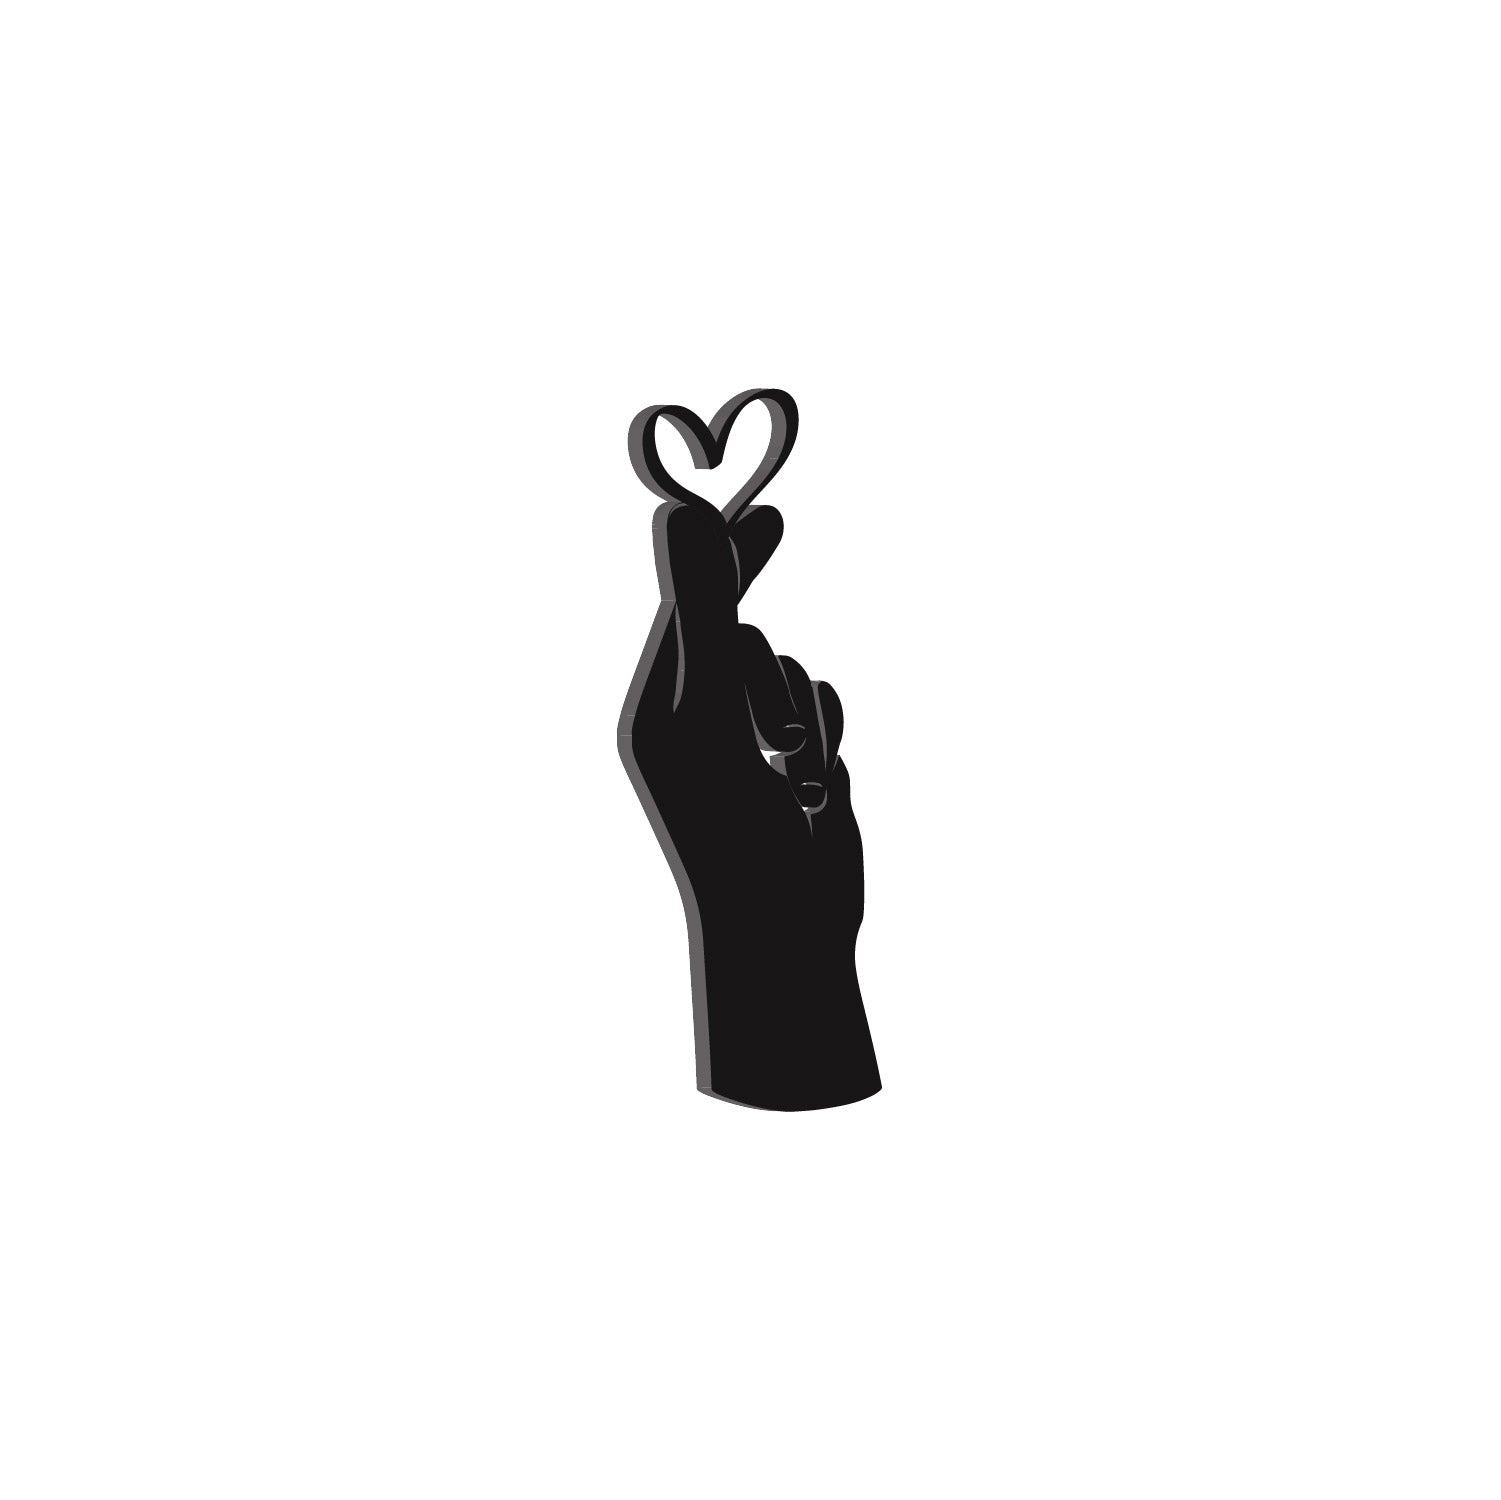 "Little Heart in Hand" Love Theme Black Engineered Wood Wall Art Cutout, Ready to Hang Home Decor 4